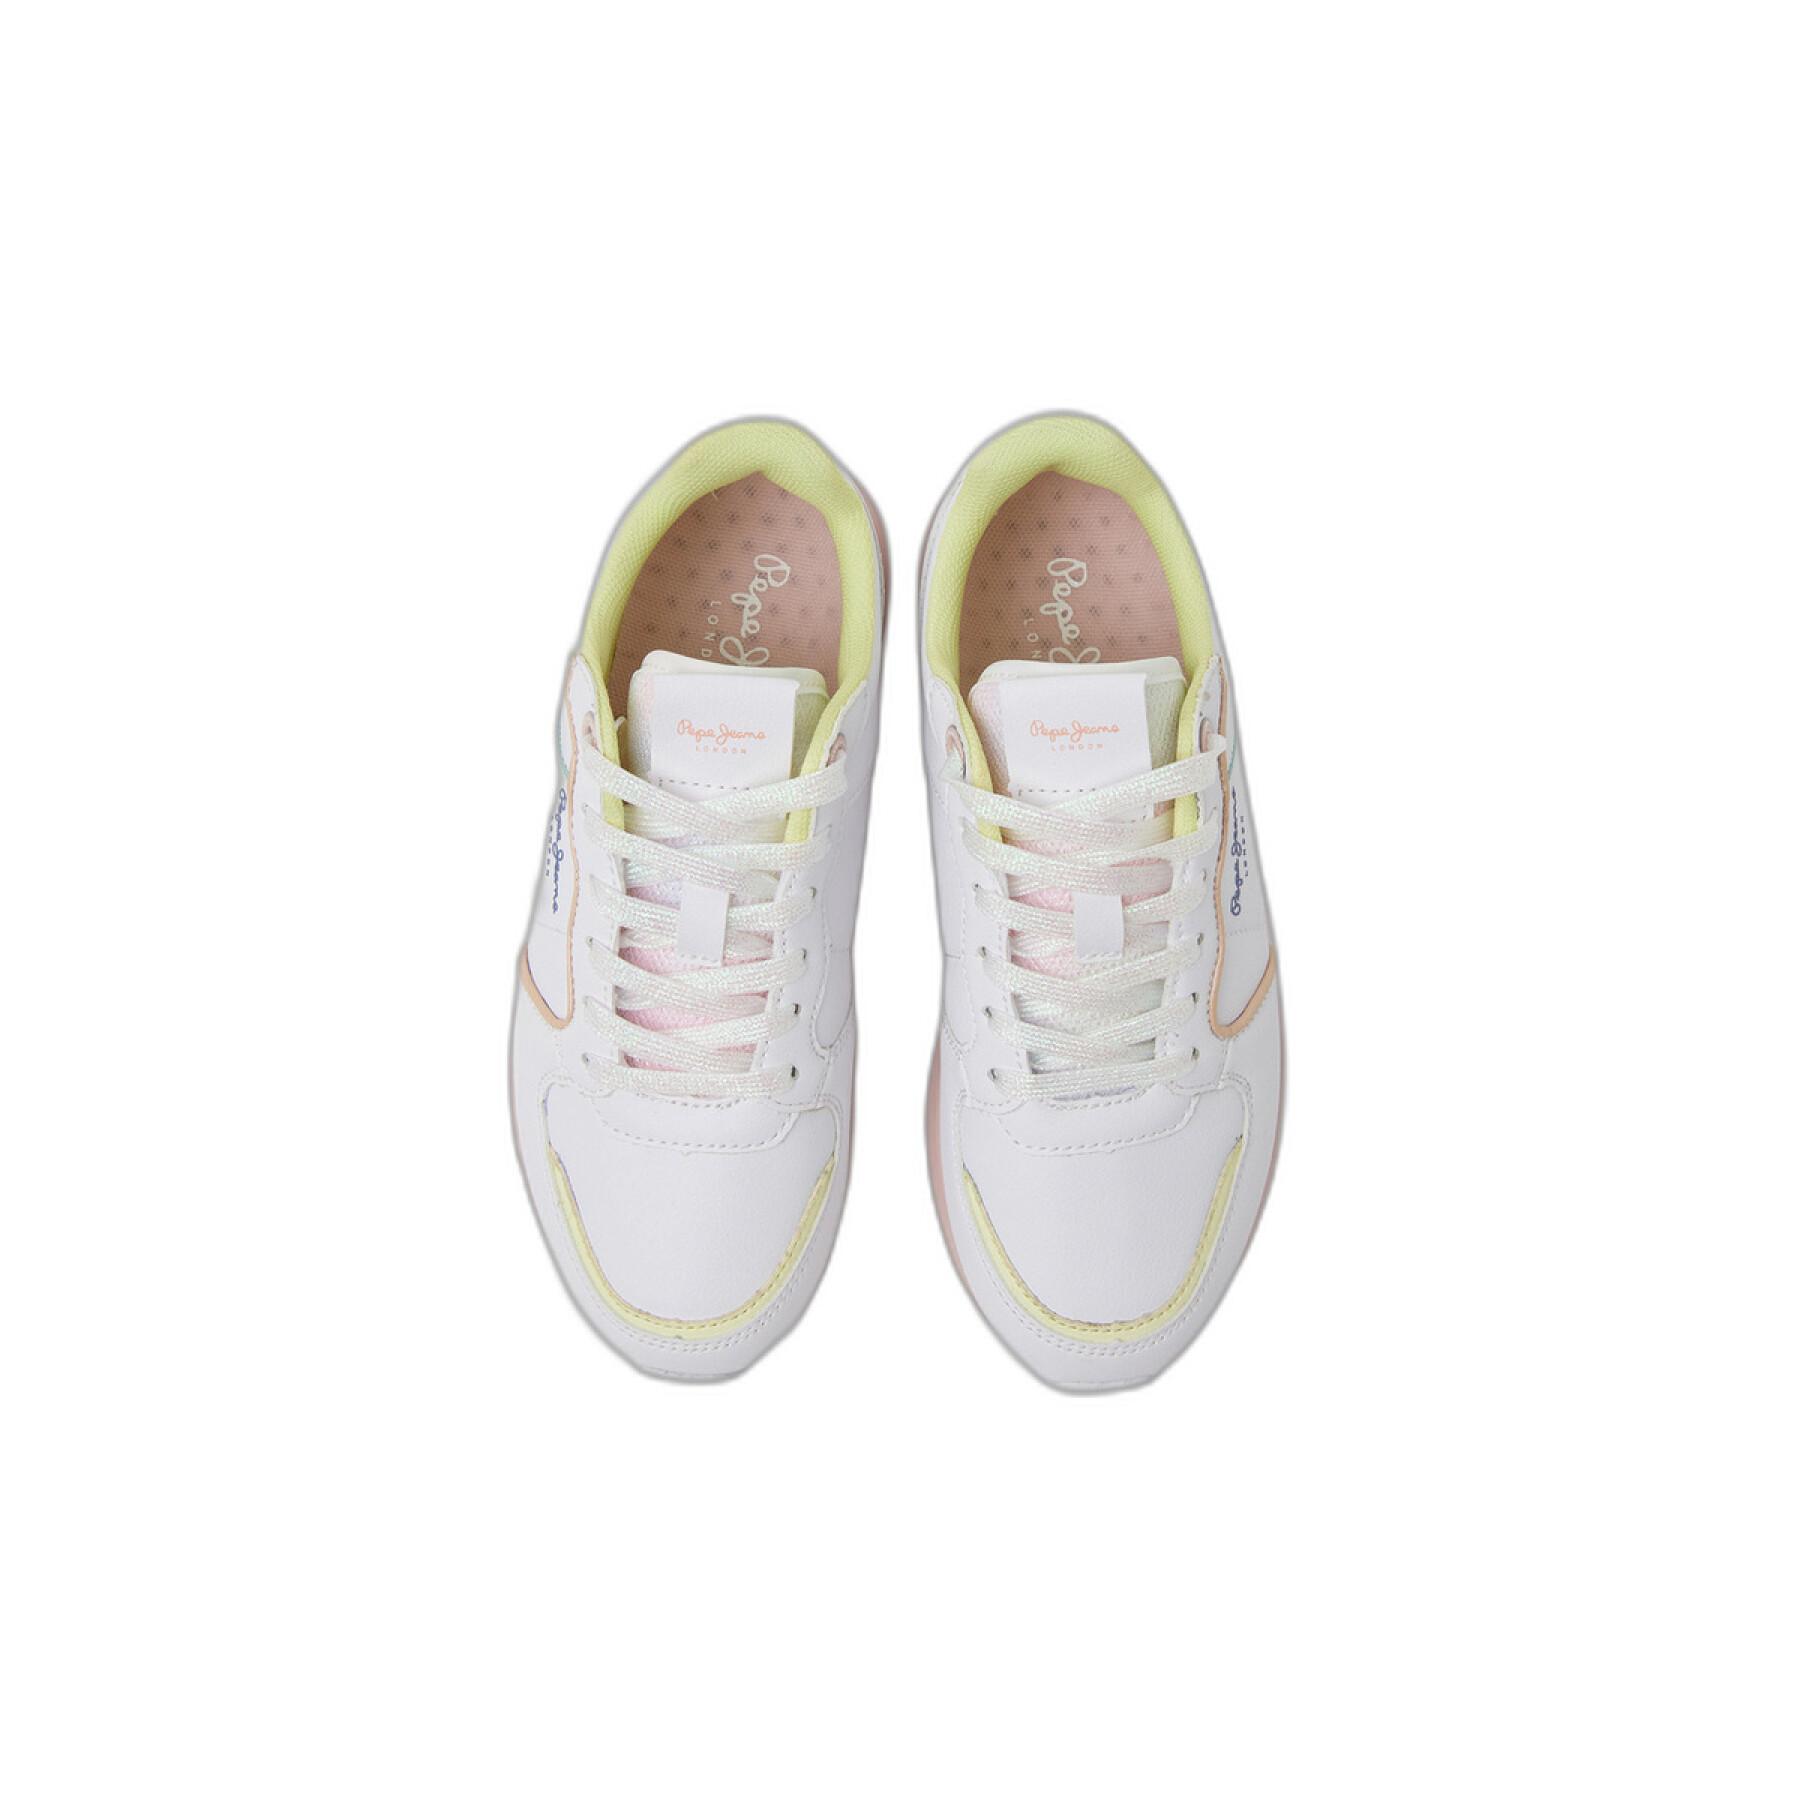 Girl sneakers Pepe Jeans York Candy